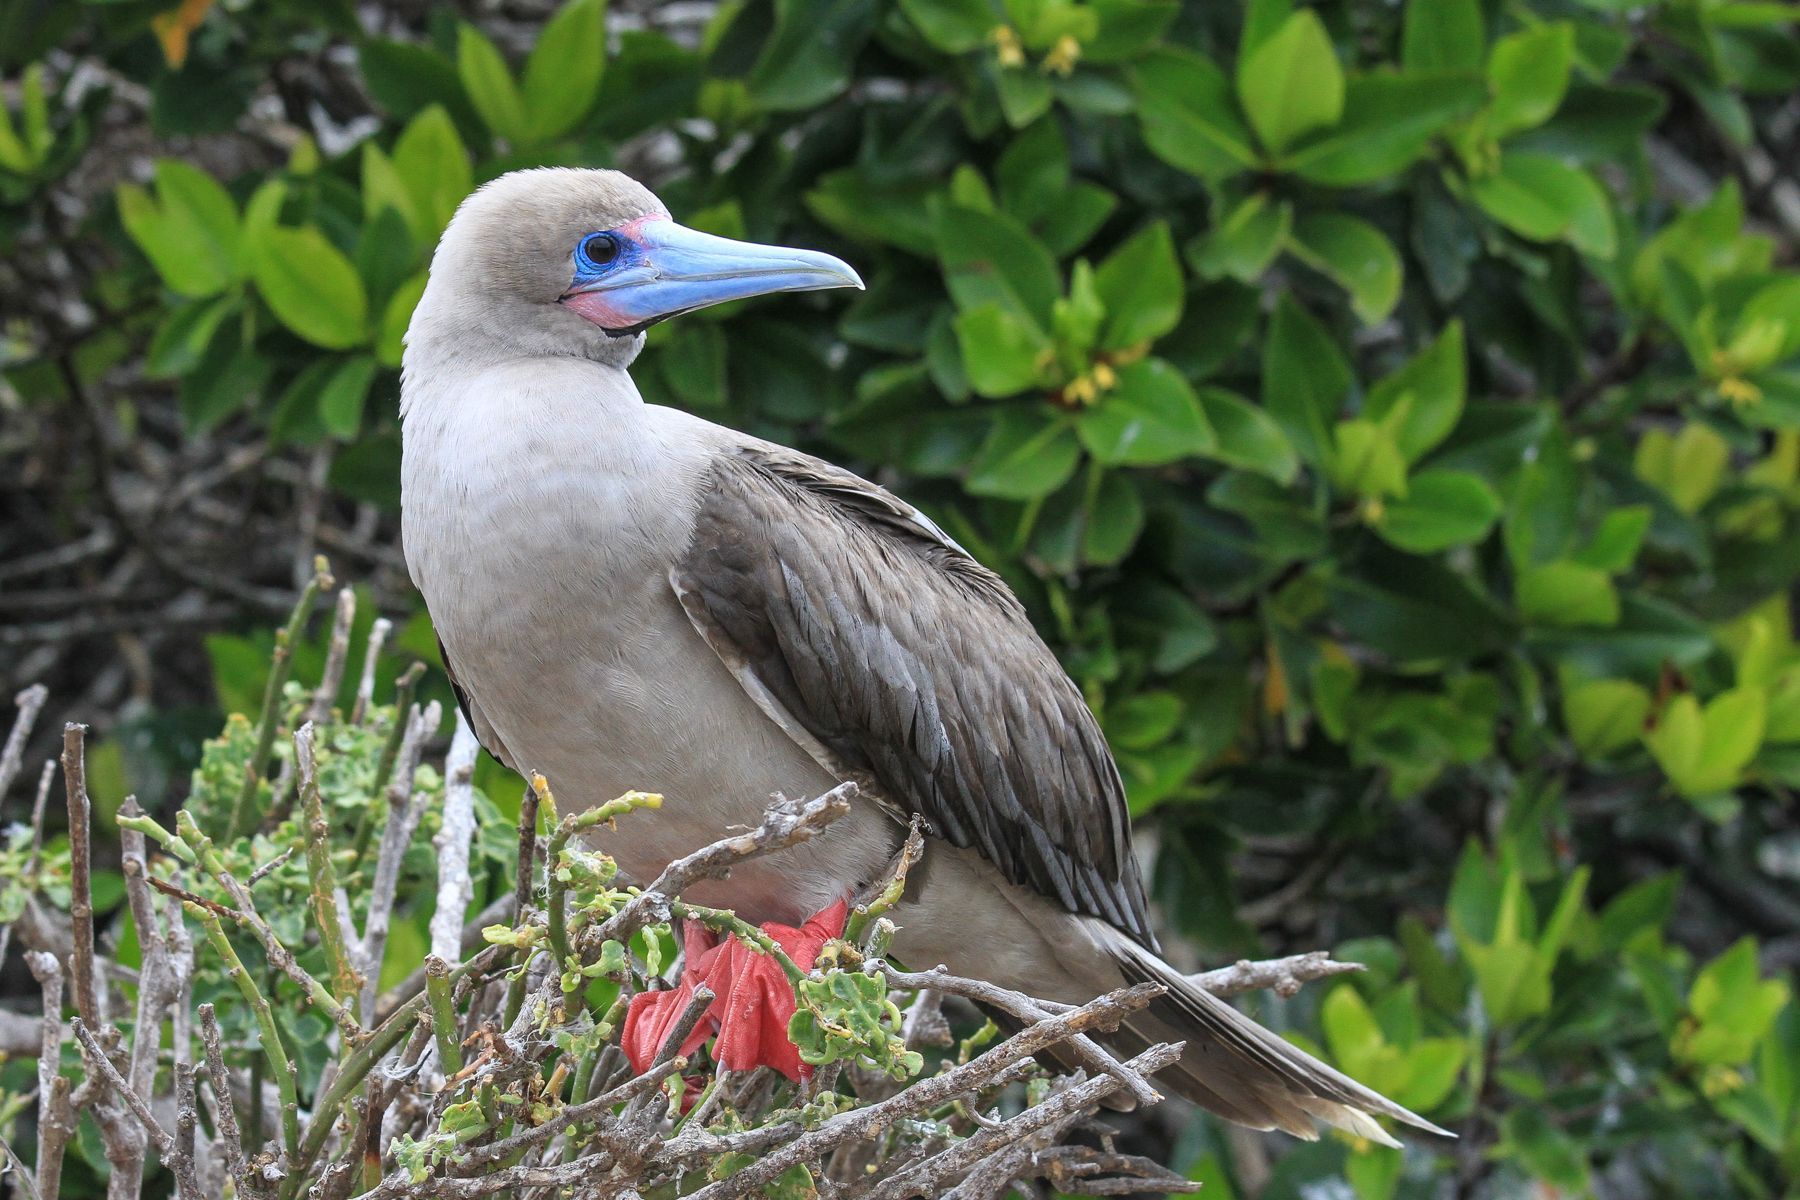 Galapagos has many seabird riches, including nesting Red-footed Boobies